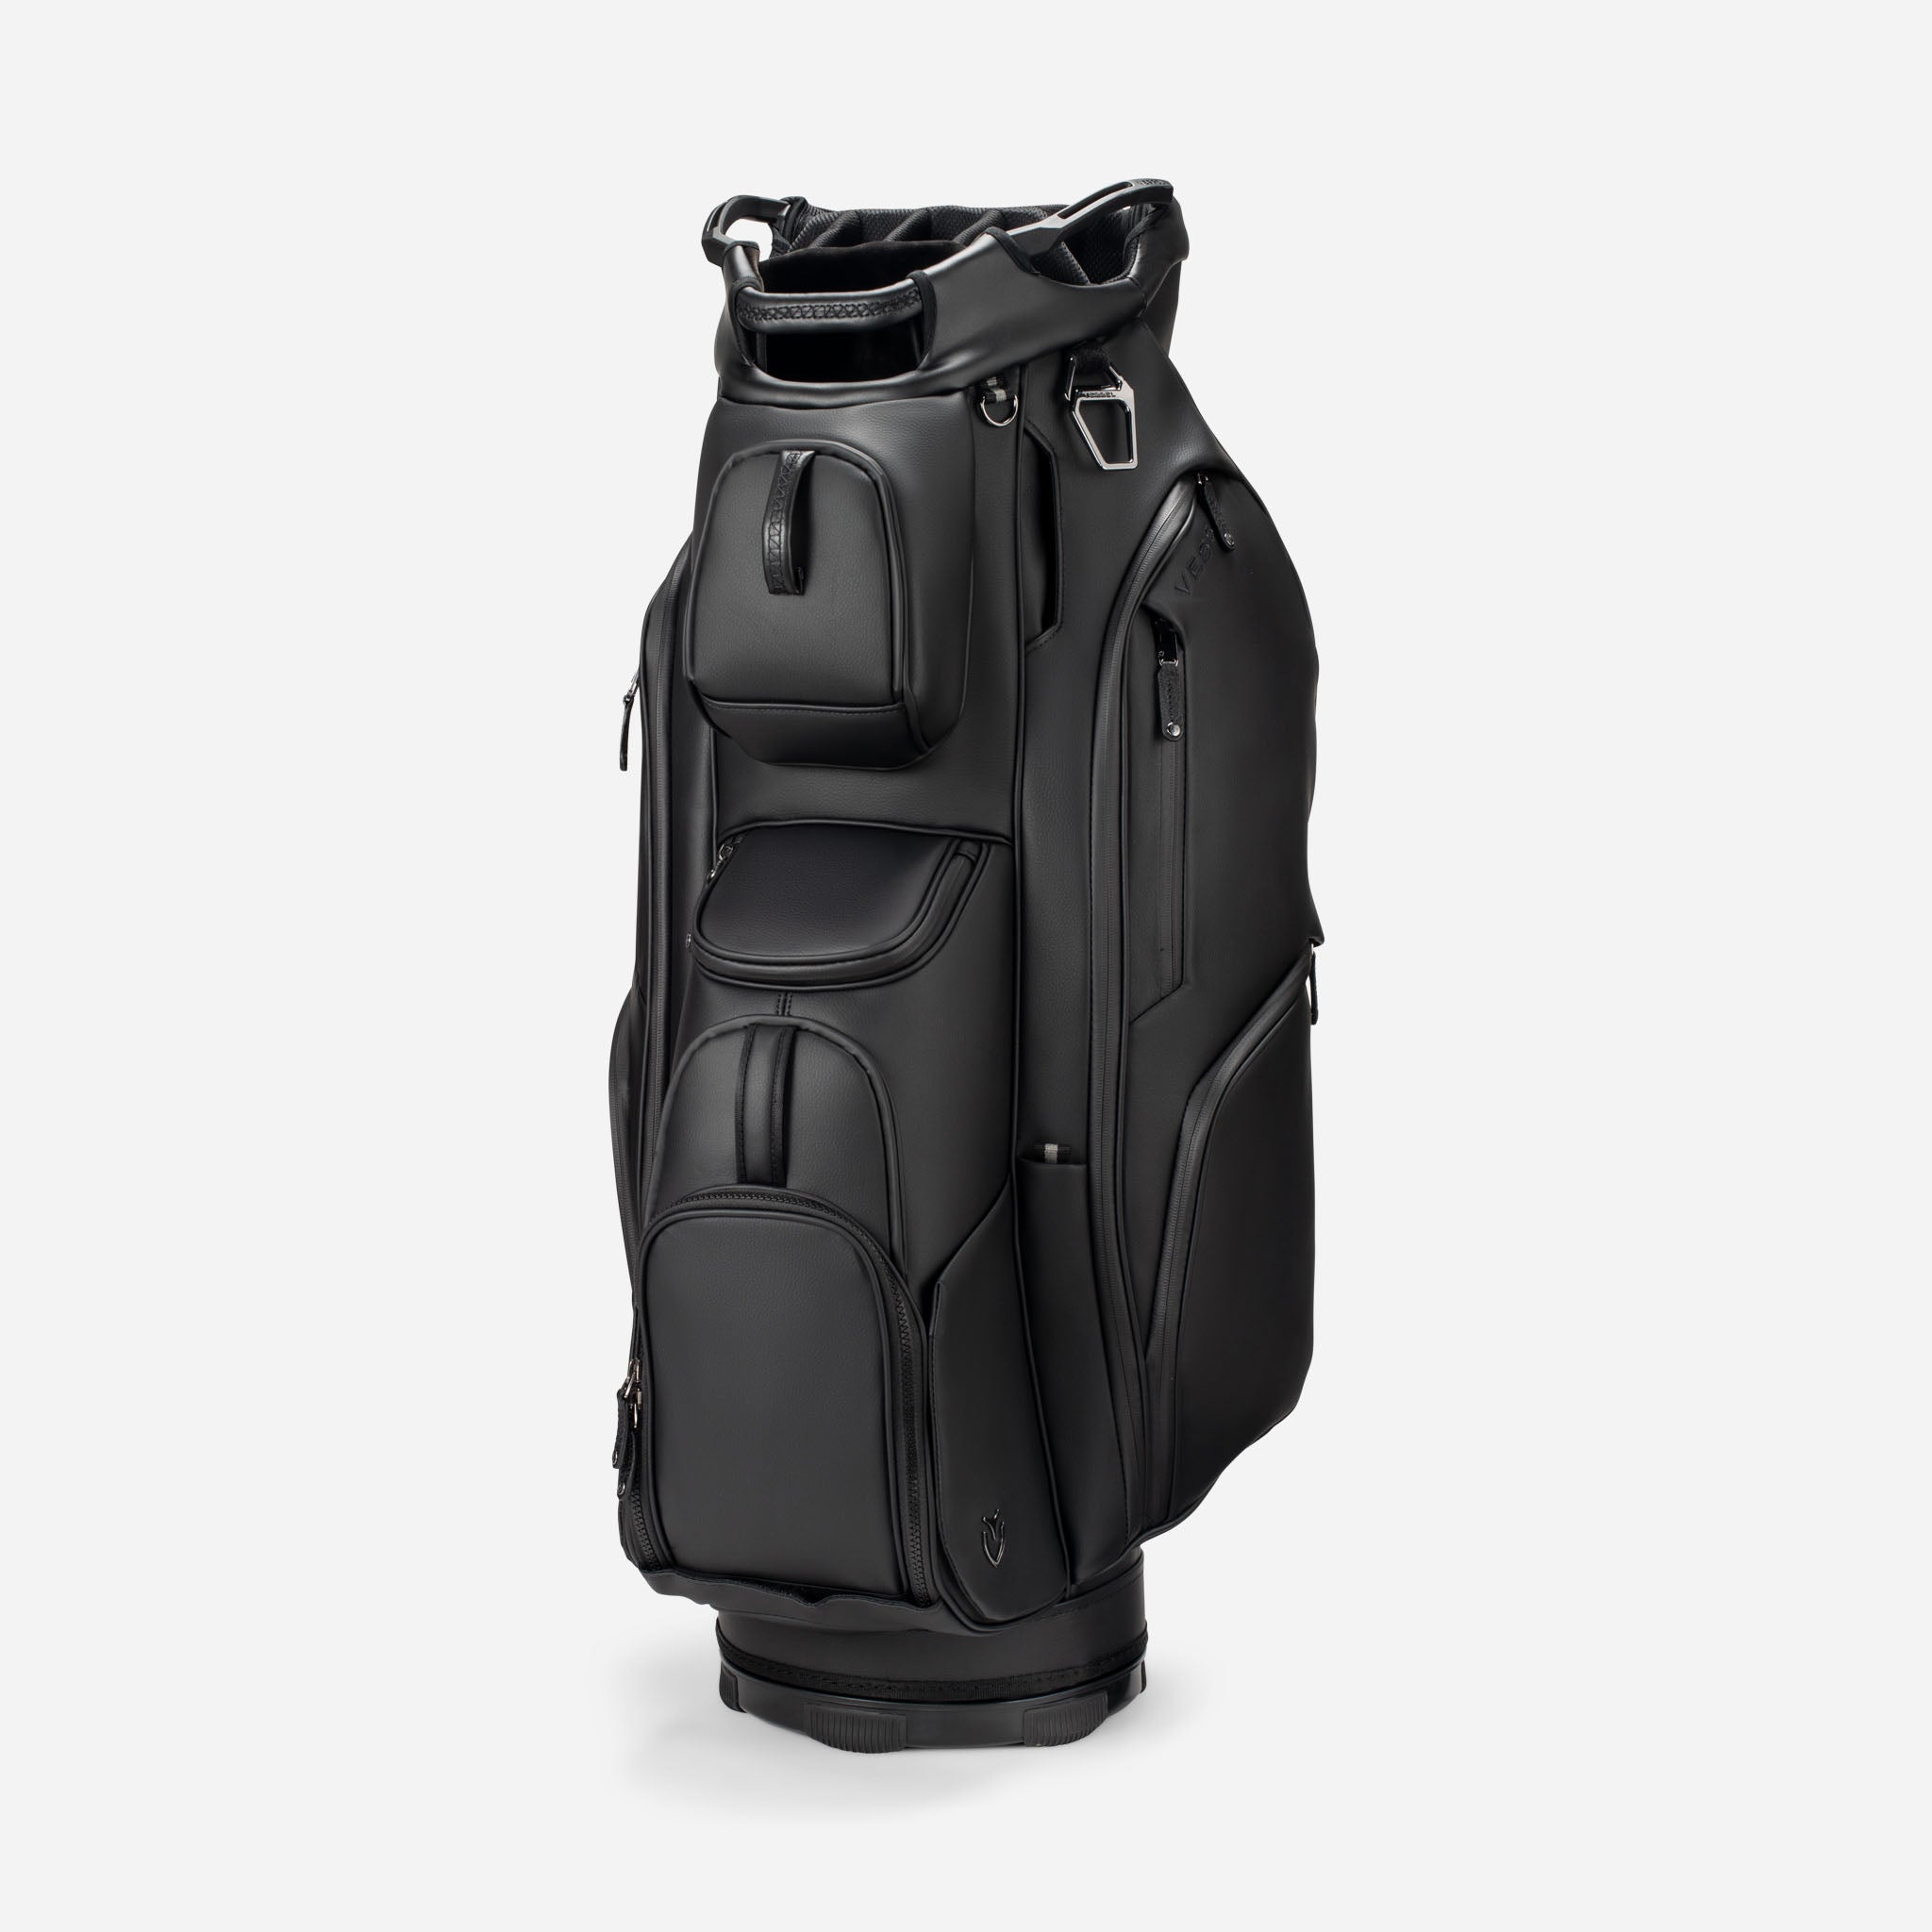 Introducing the Lux XV 2.0: Where Form Meets Function in Golf Bag Engineering